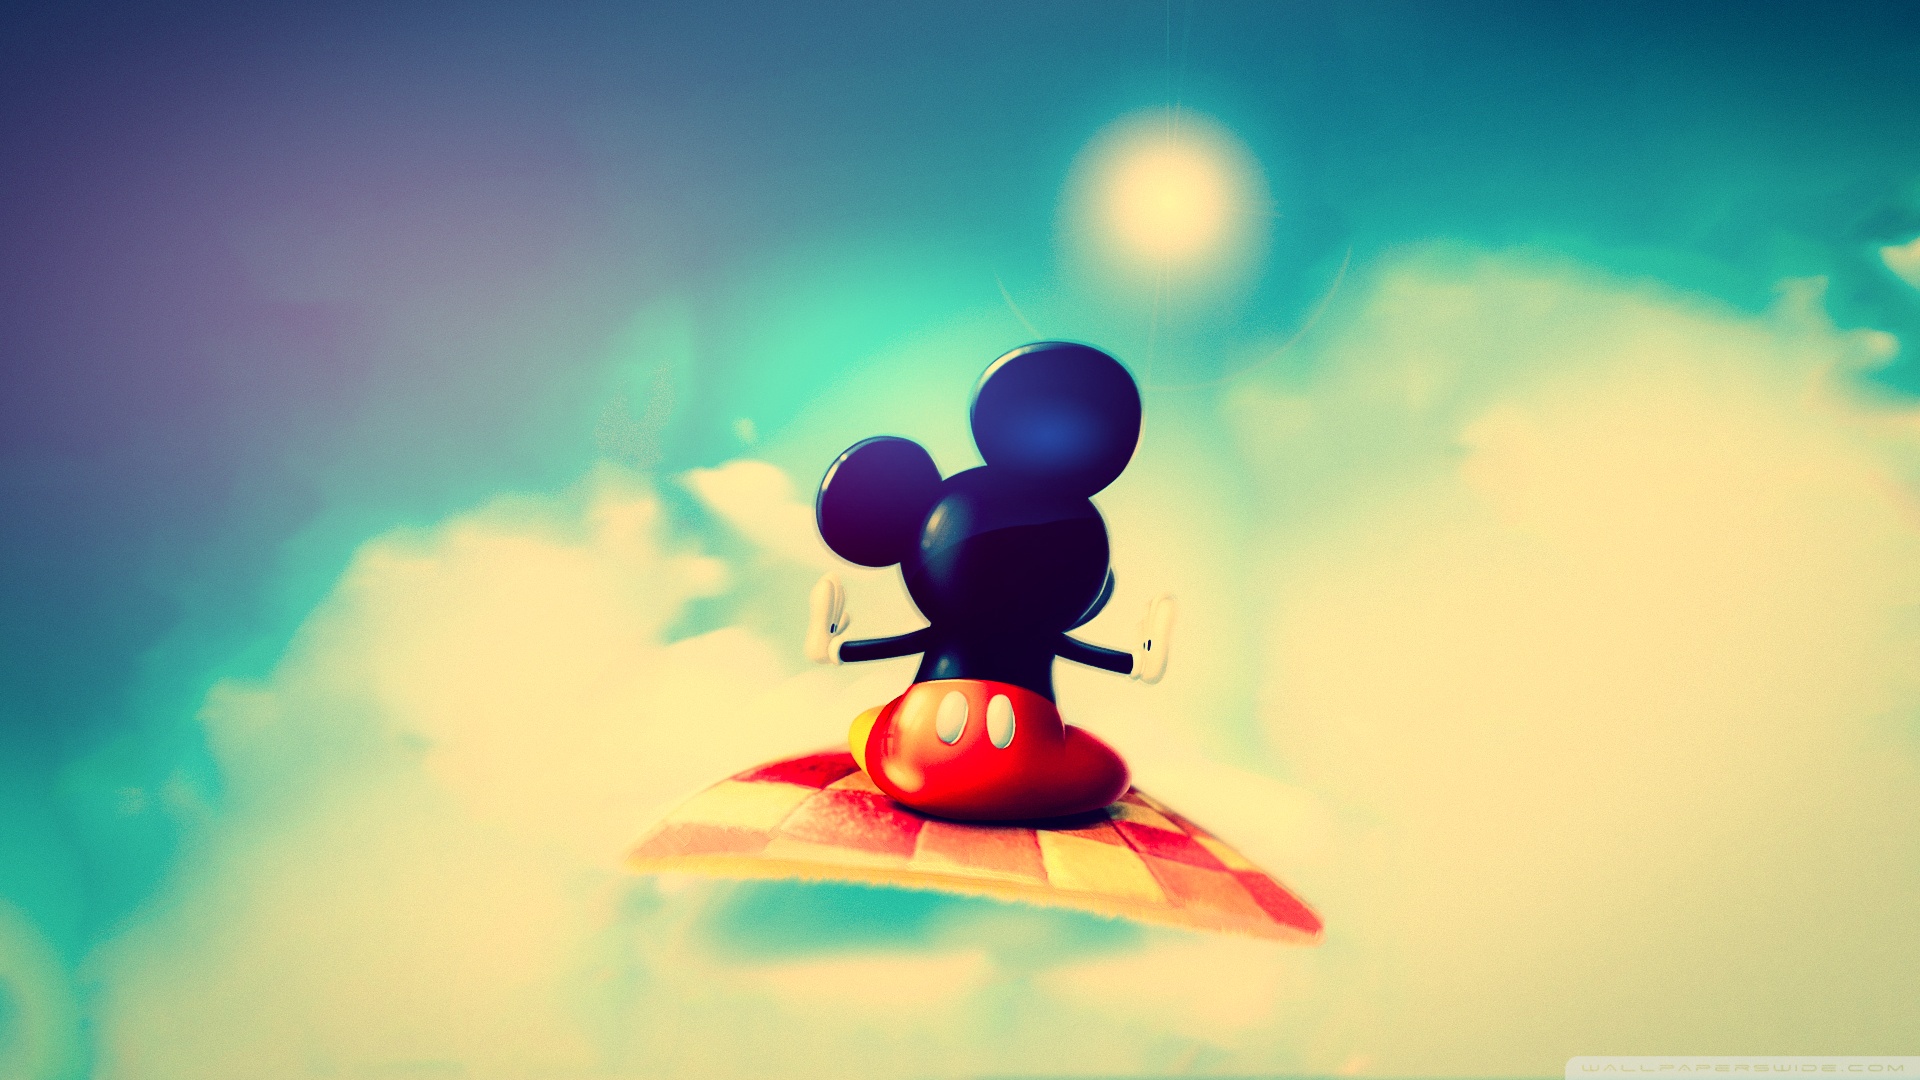 Free Download Mickey Mouse Cute Wallpaper 19x1080 For Your Desktop Mobile Tablet Explore 48 Mickey Mouse Luau Wallpaper Mickey Mouse Luau Wallpaper Mickey Mouse Background Mickey Mouse Wallpaper